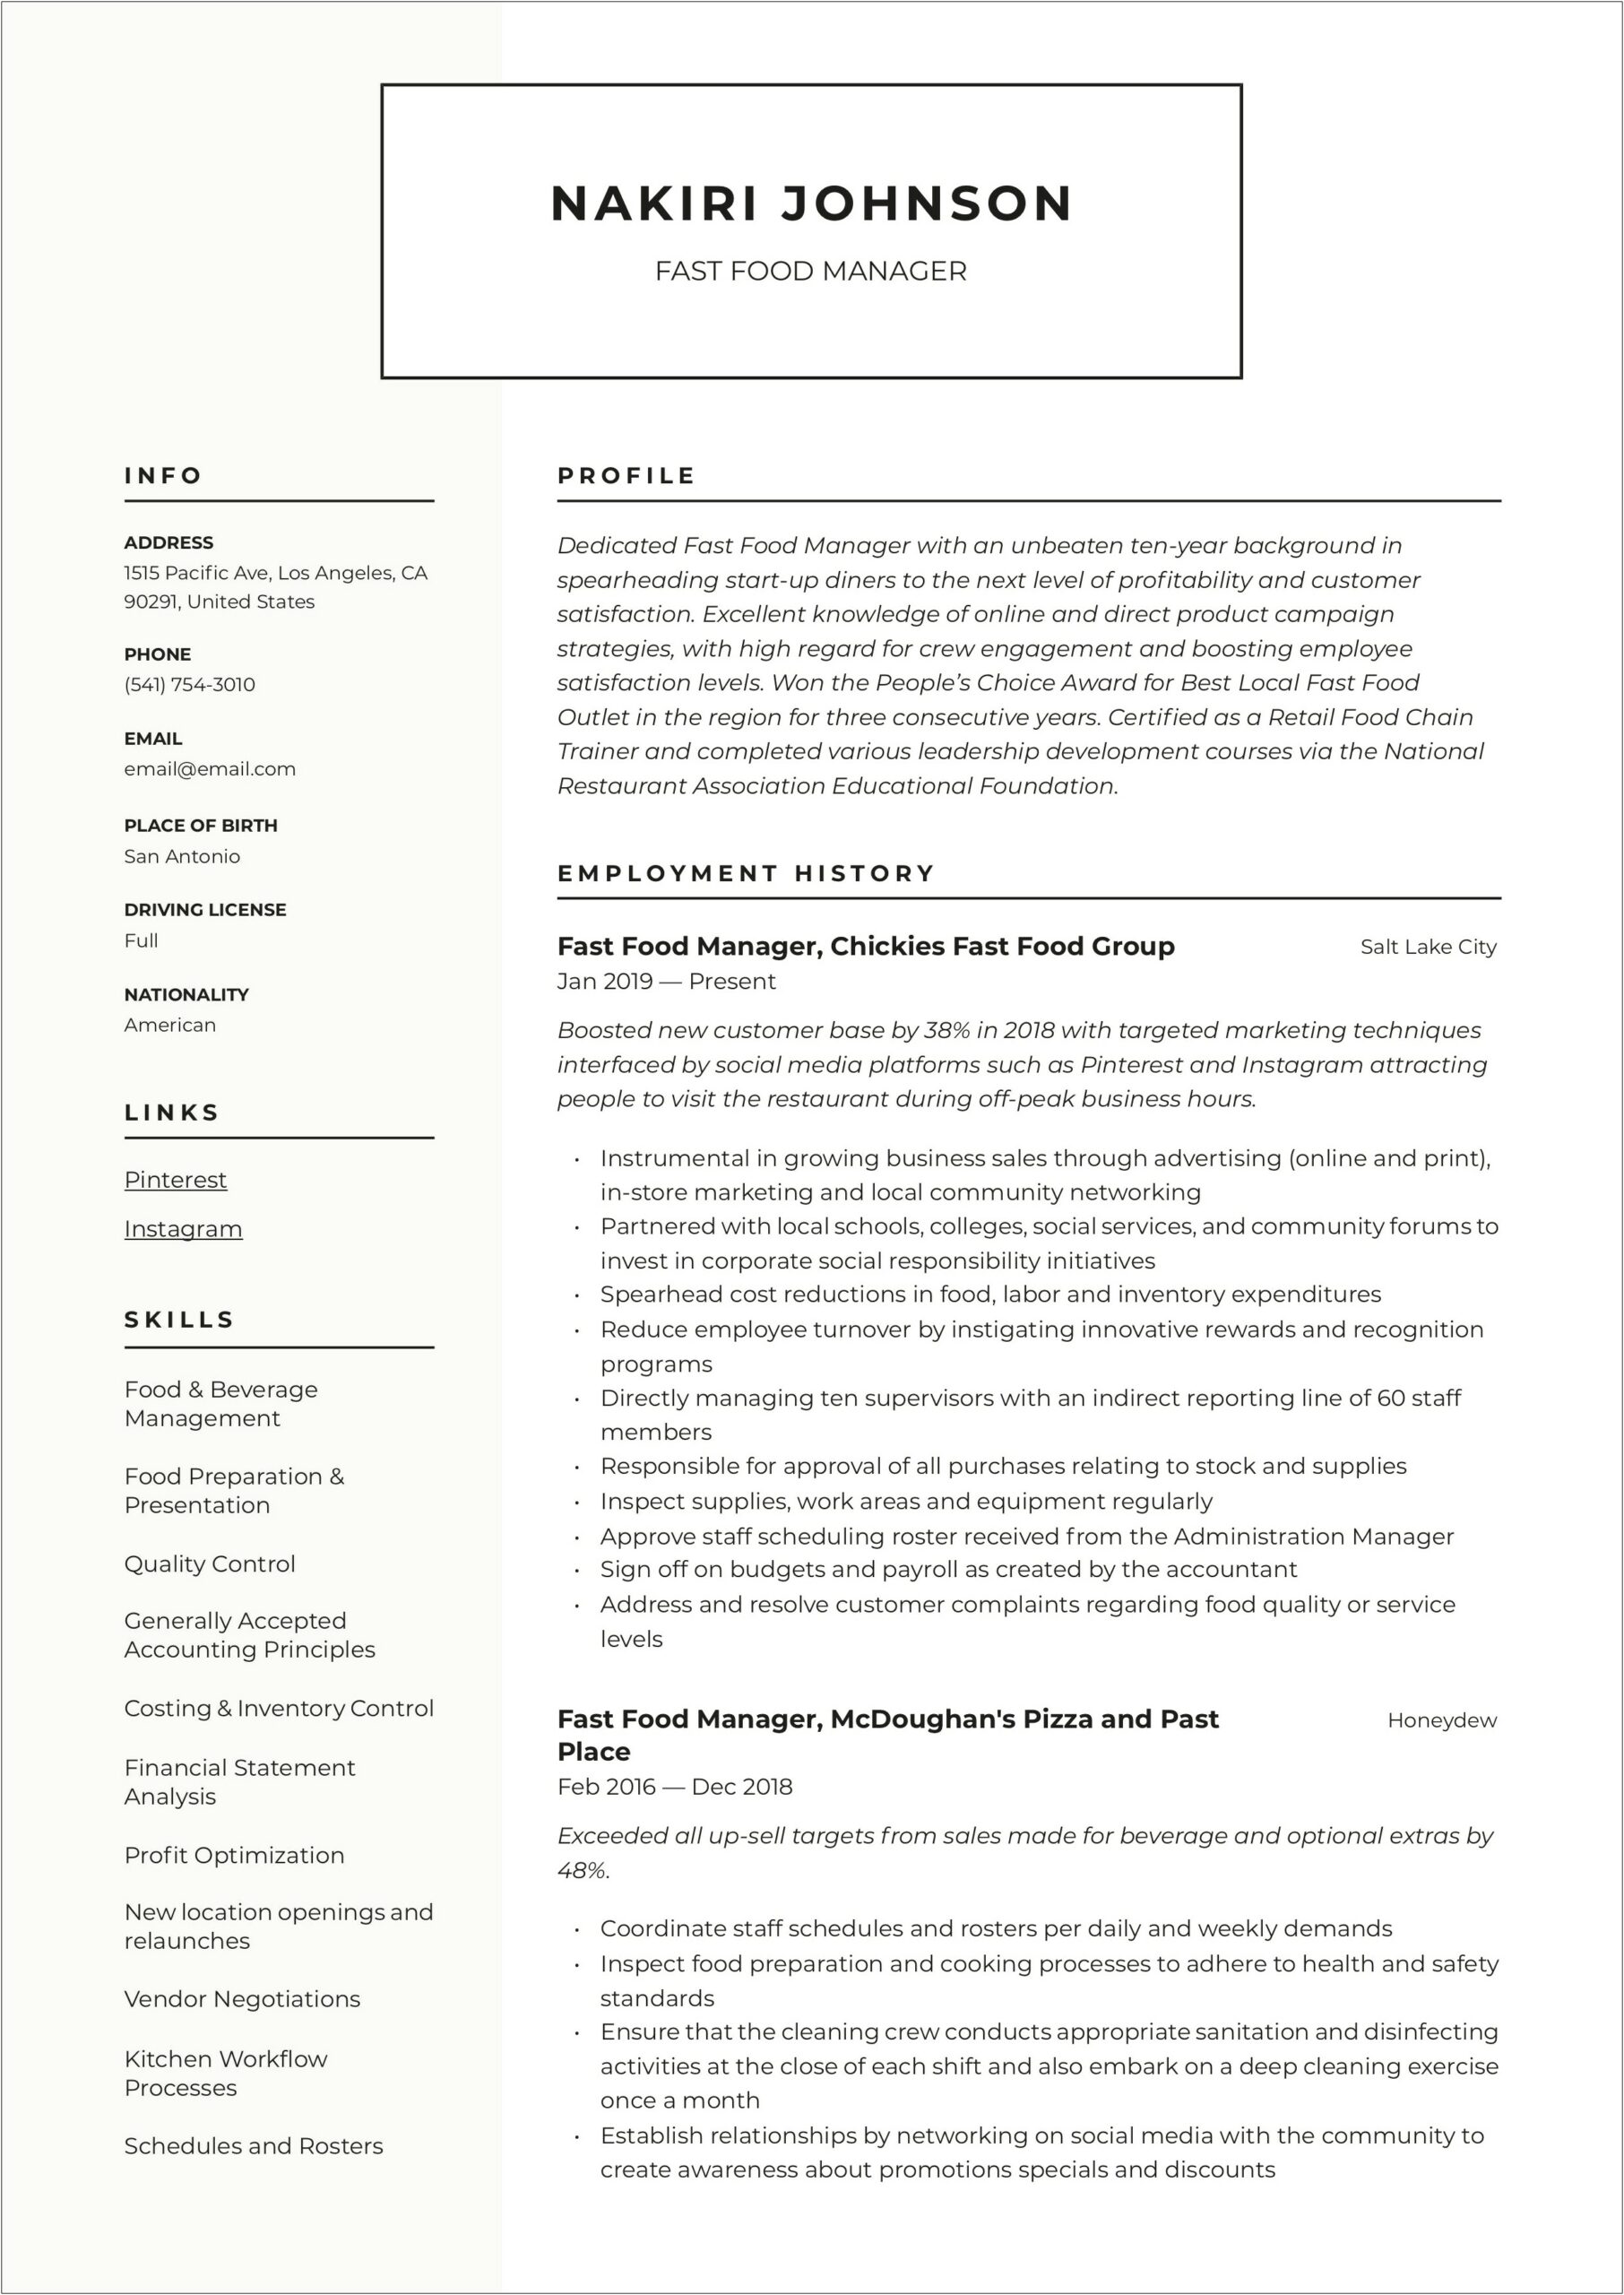 Retirement Home Kitchen Manager Resume